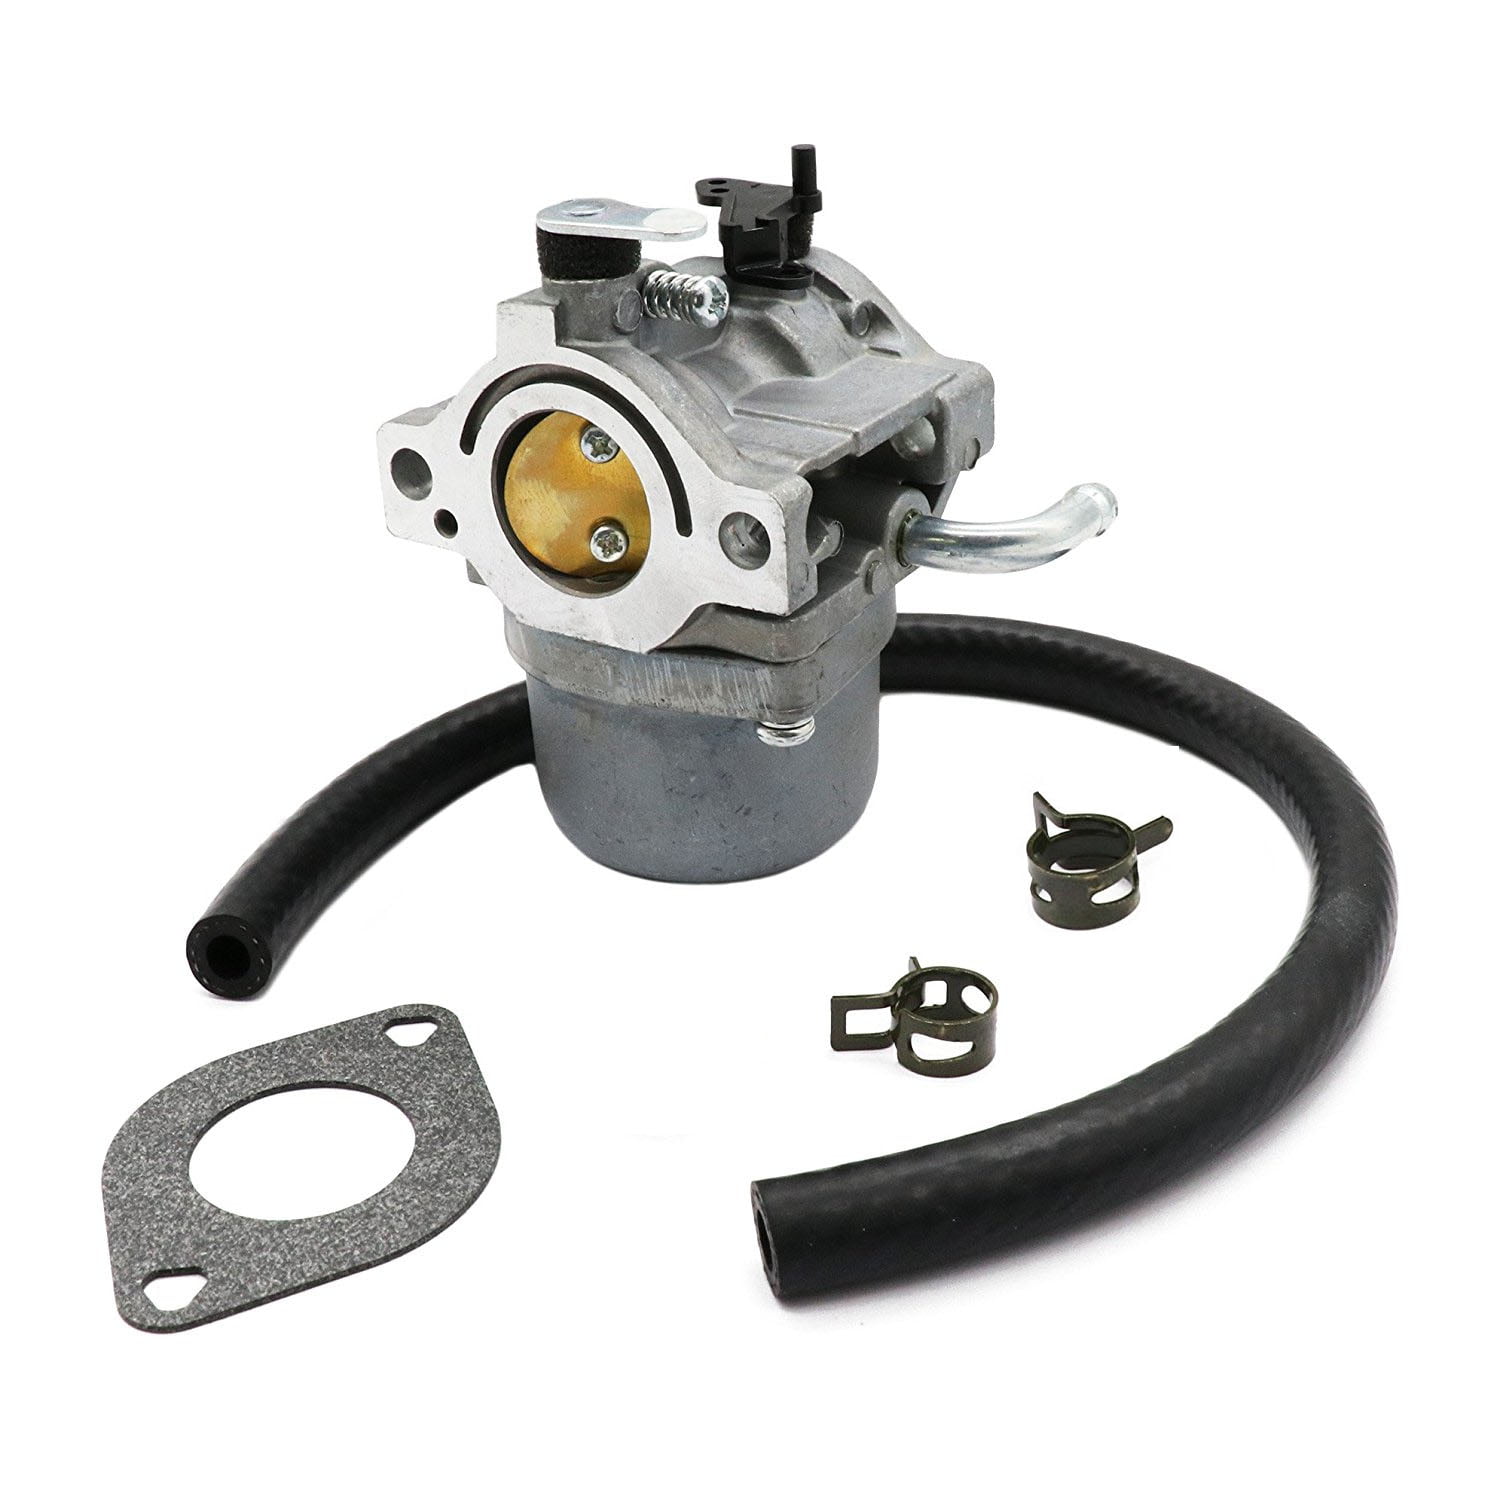 Details about   Carburetor Carb for Briggs & Stratton B&S 21S132-0036-F1 21S132-0063-F1 Engine 